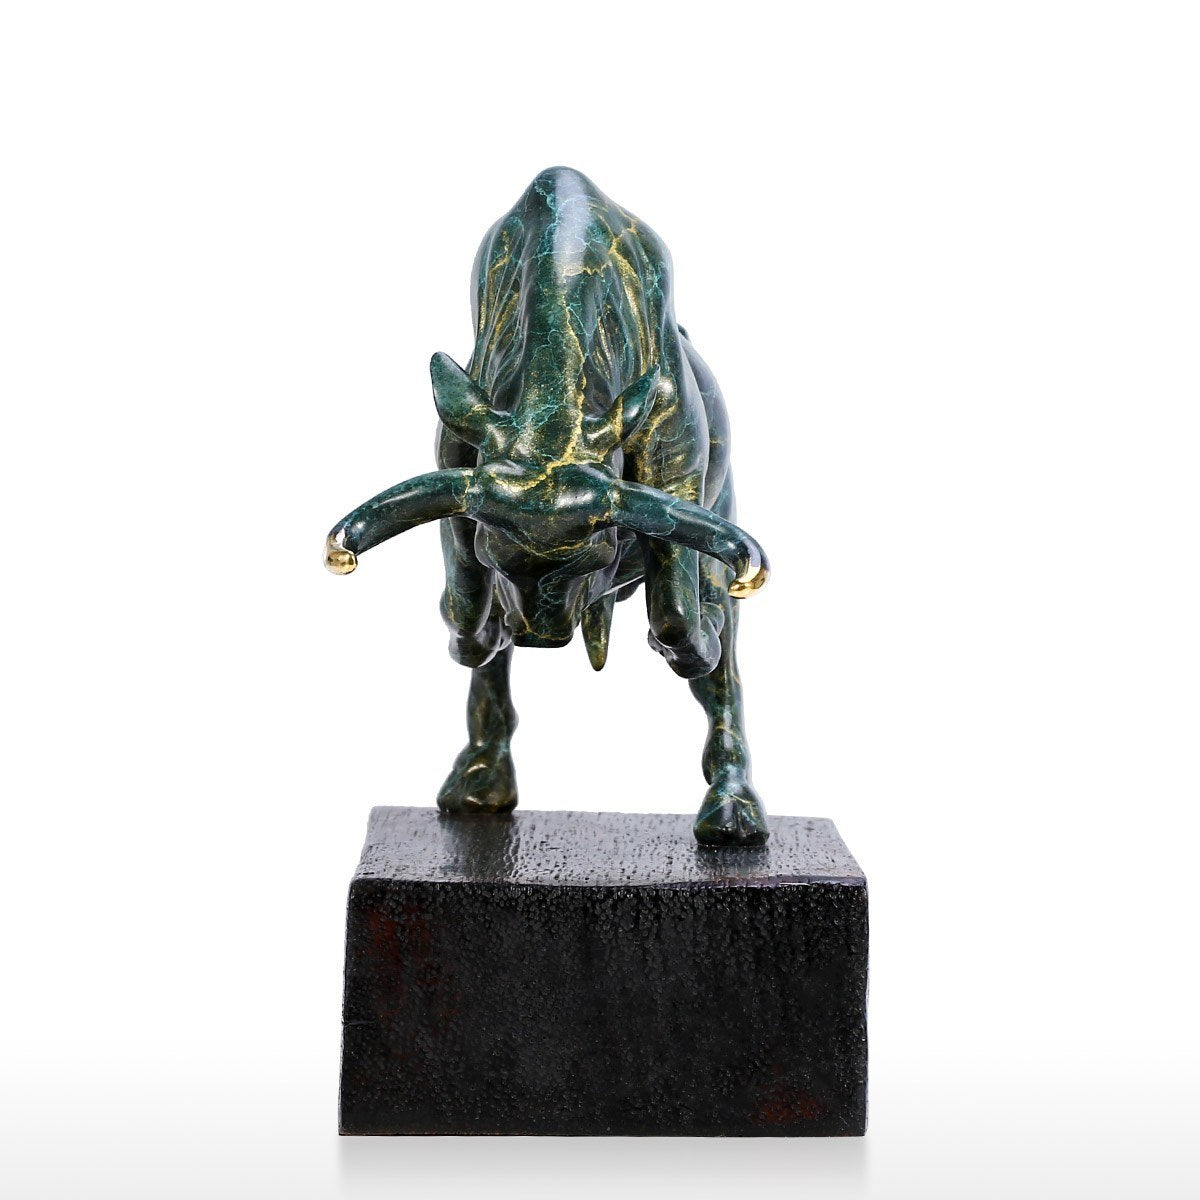 Bull Sculpture and Charging Bull Sculpture with Bronze Bull Sculpture